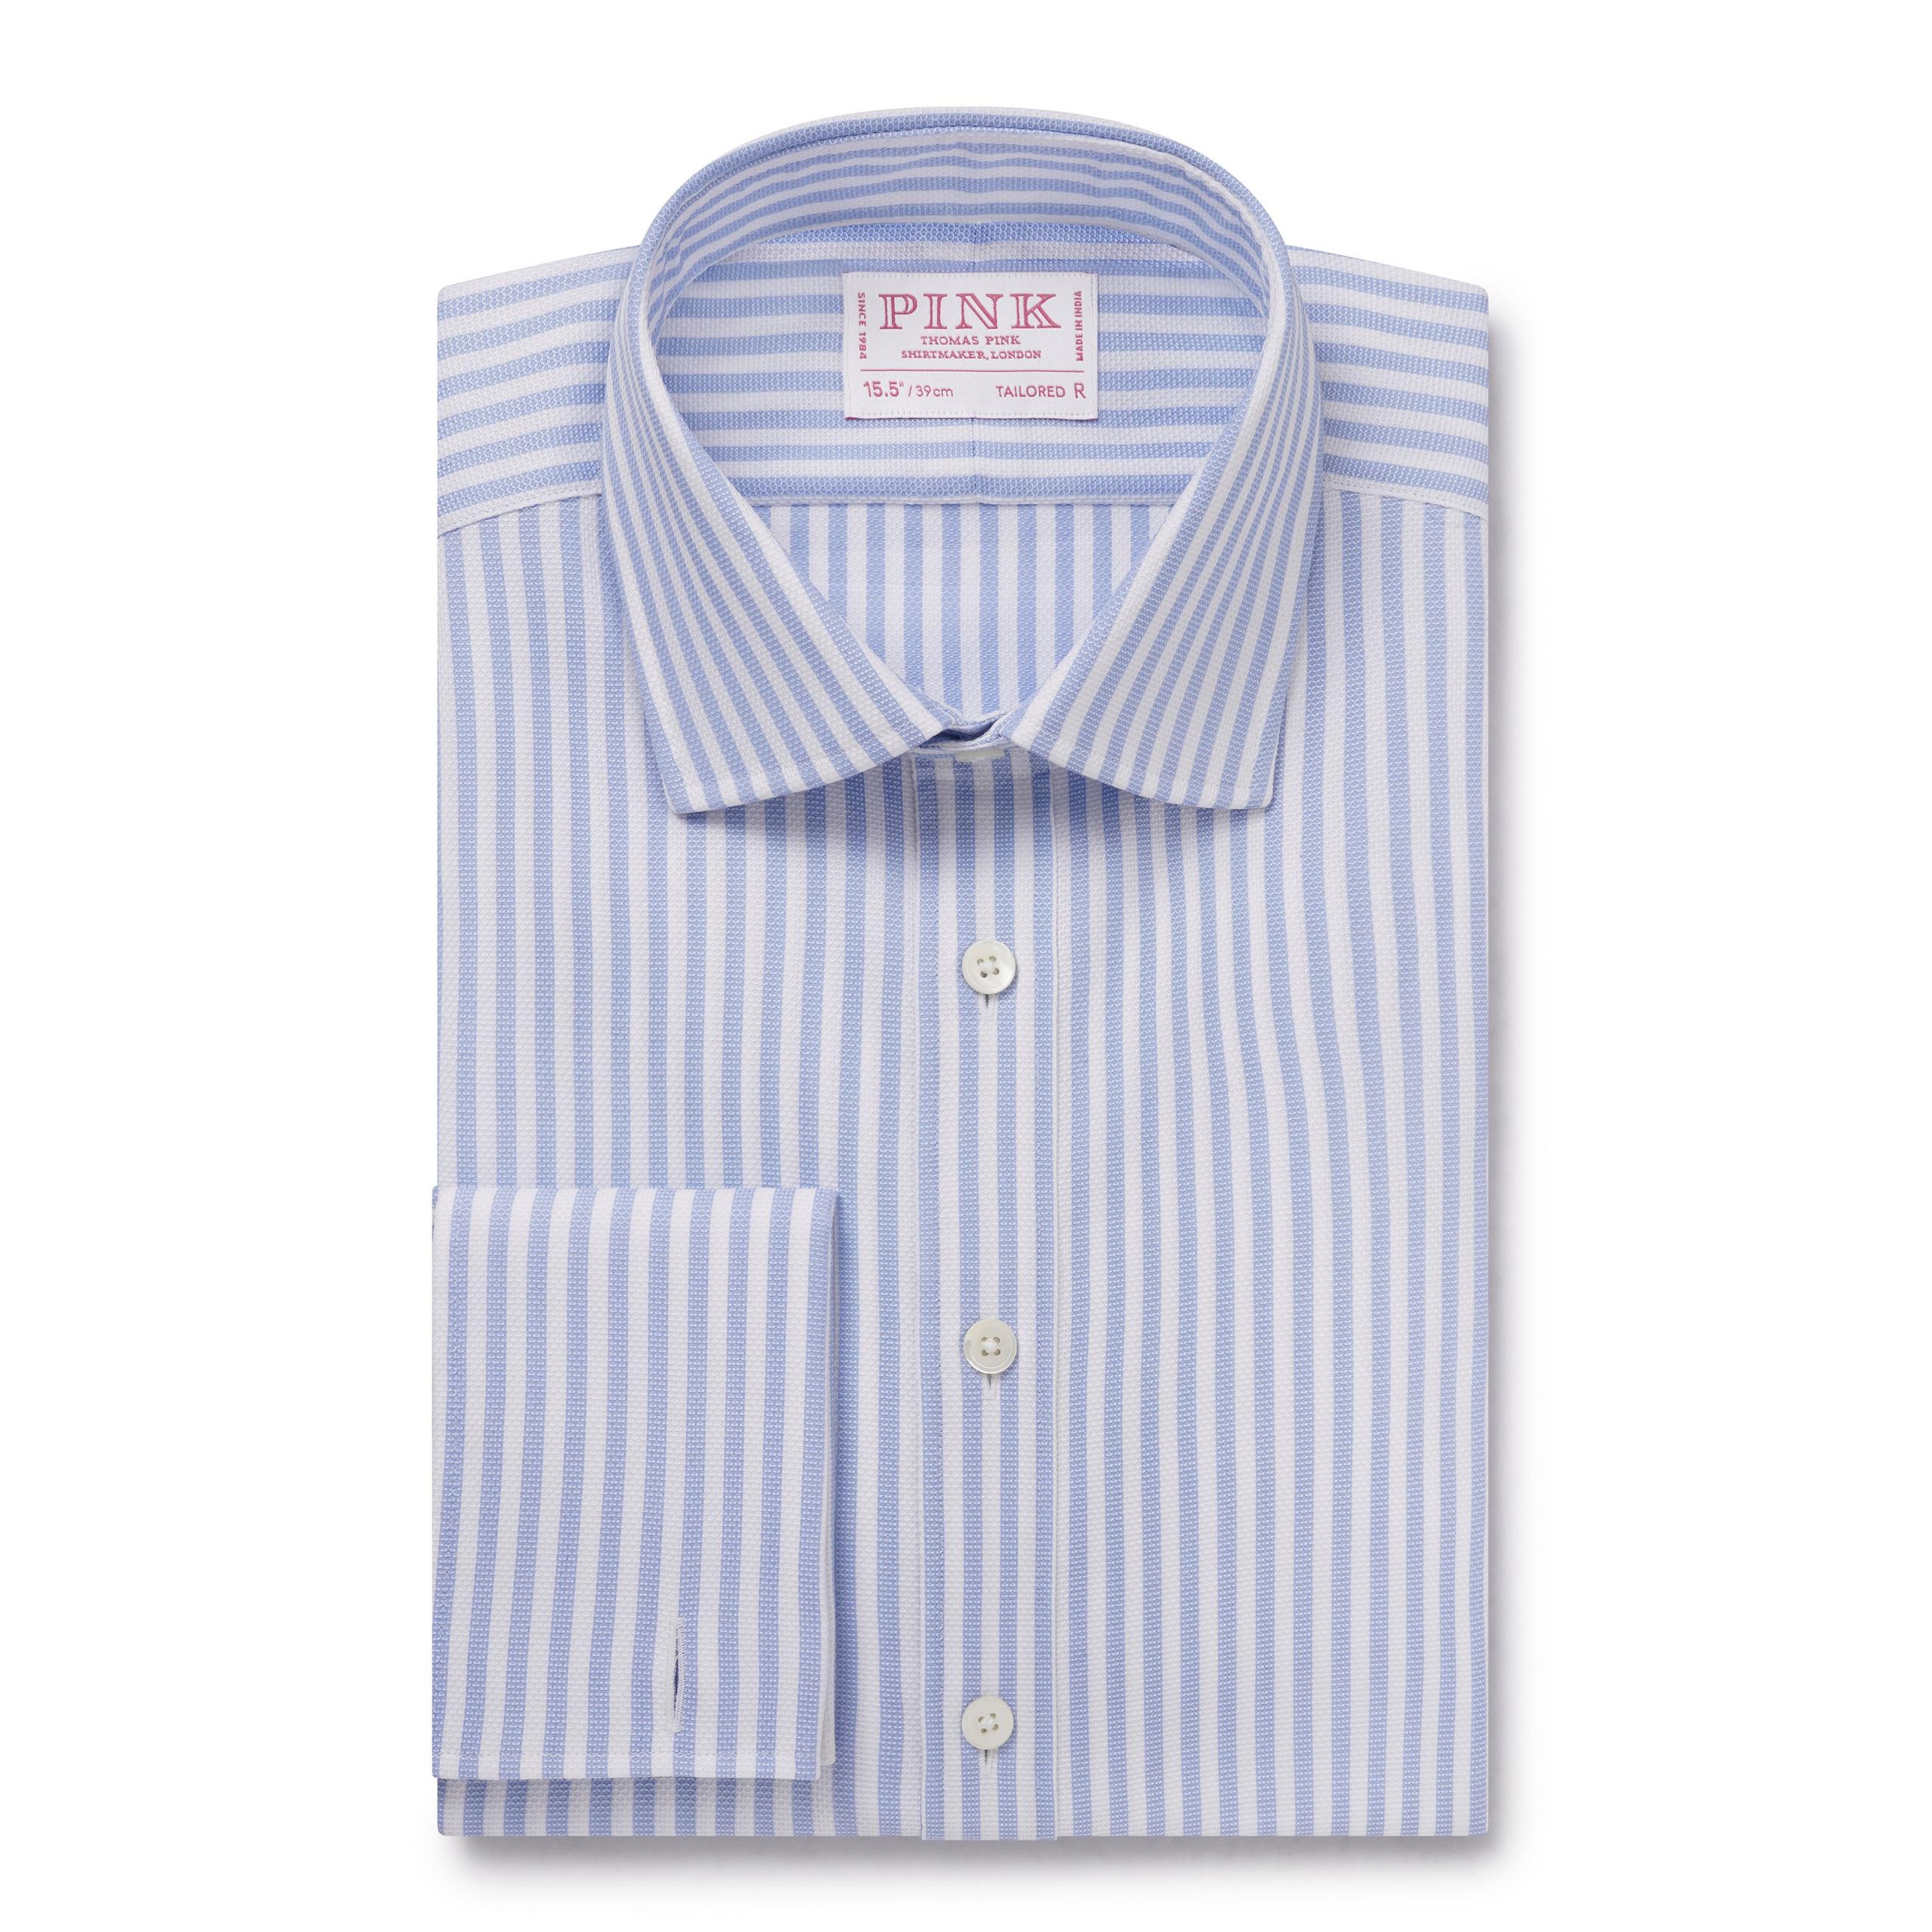 Pale Blue & White Tailored Fit Striped Dobby Dress Shirt